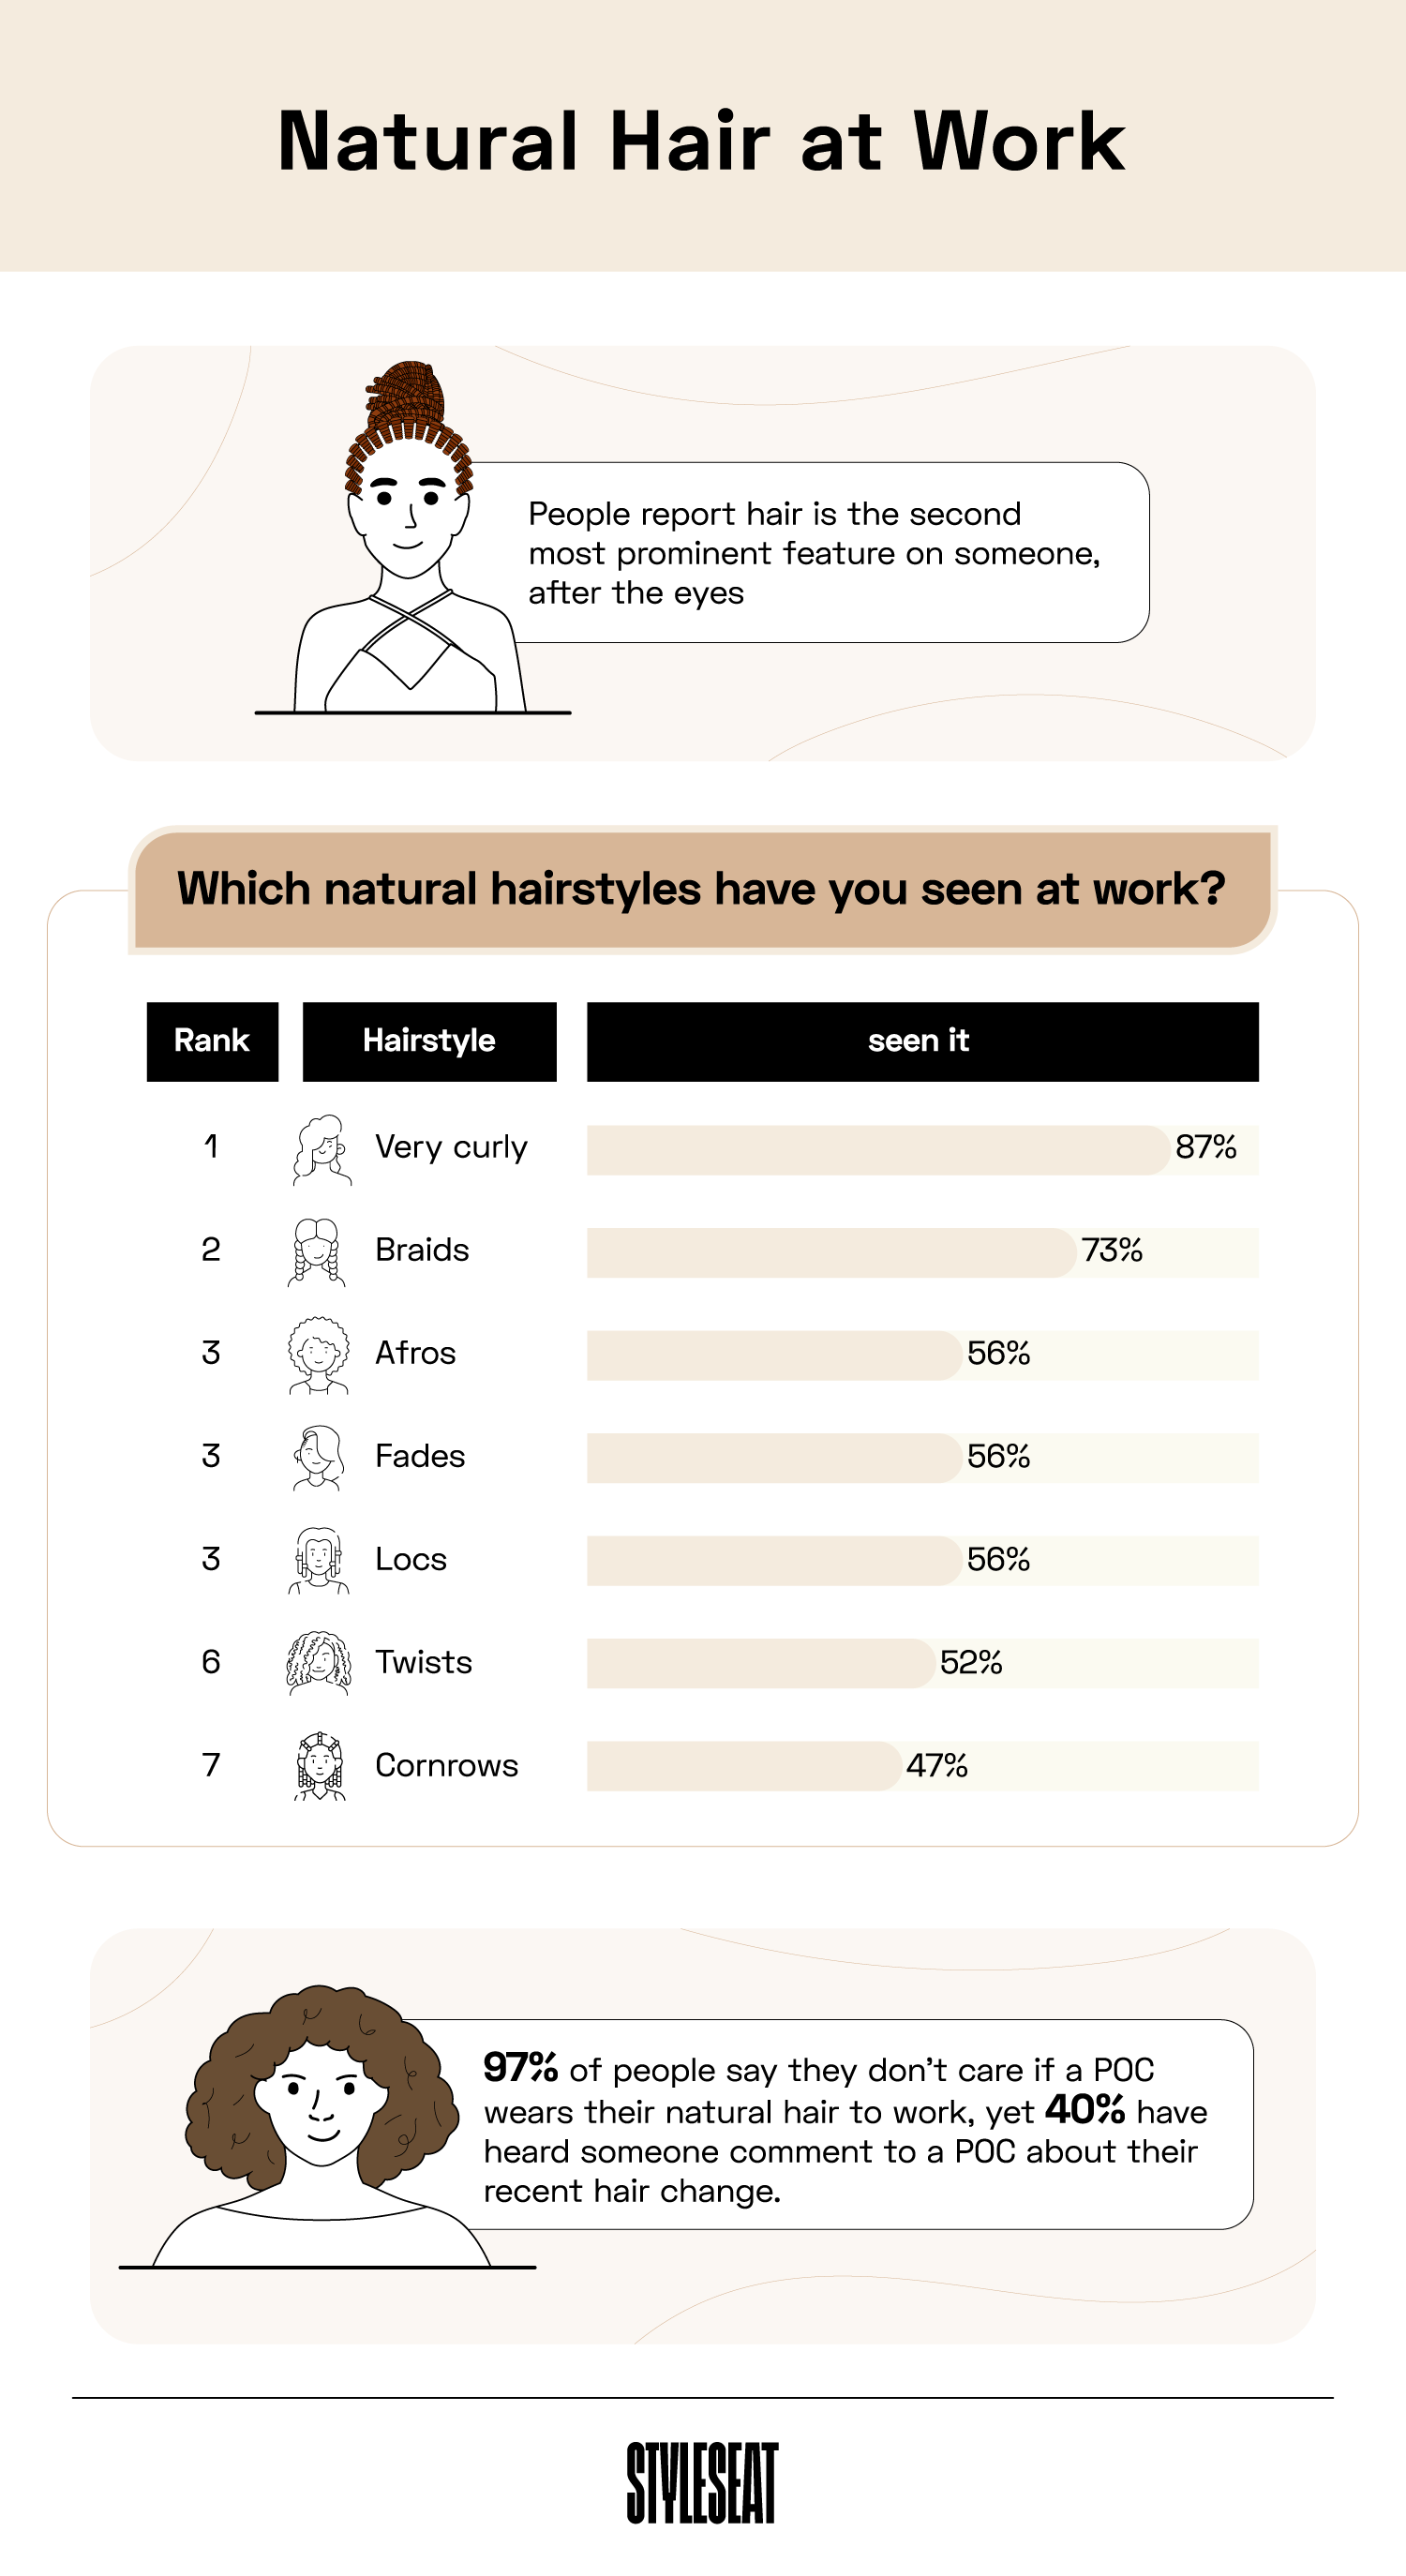 most common natural hairstyles people have seen at work